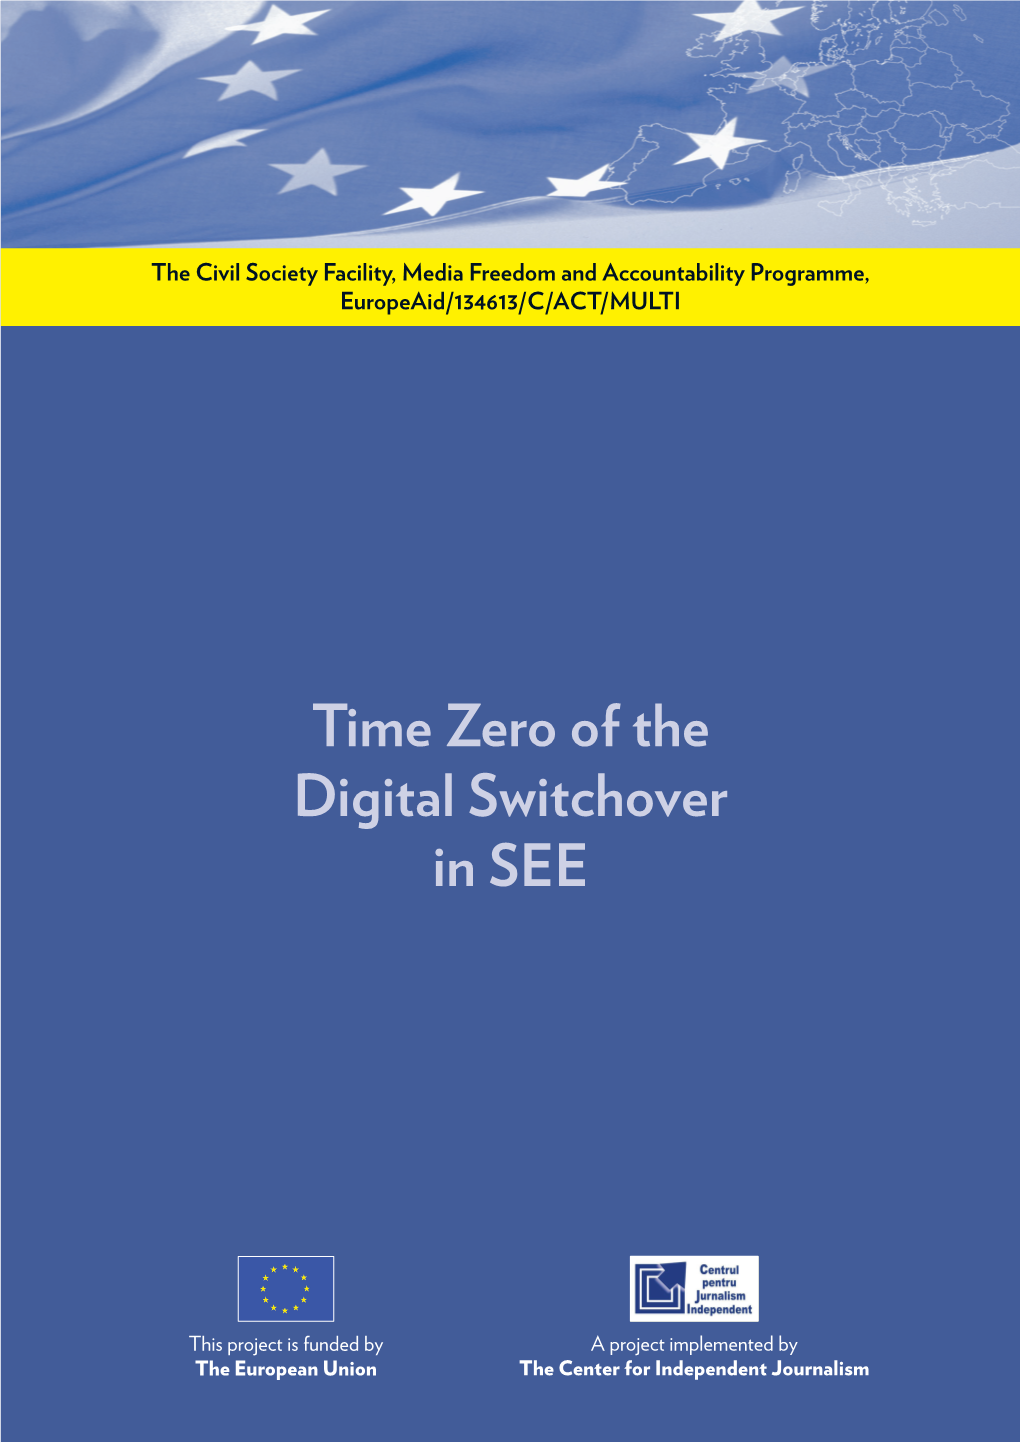 Time Zero of the Digital Switchover in SEE